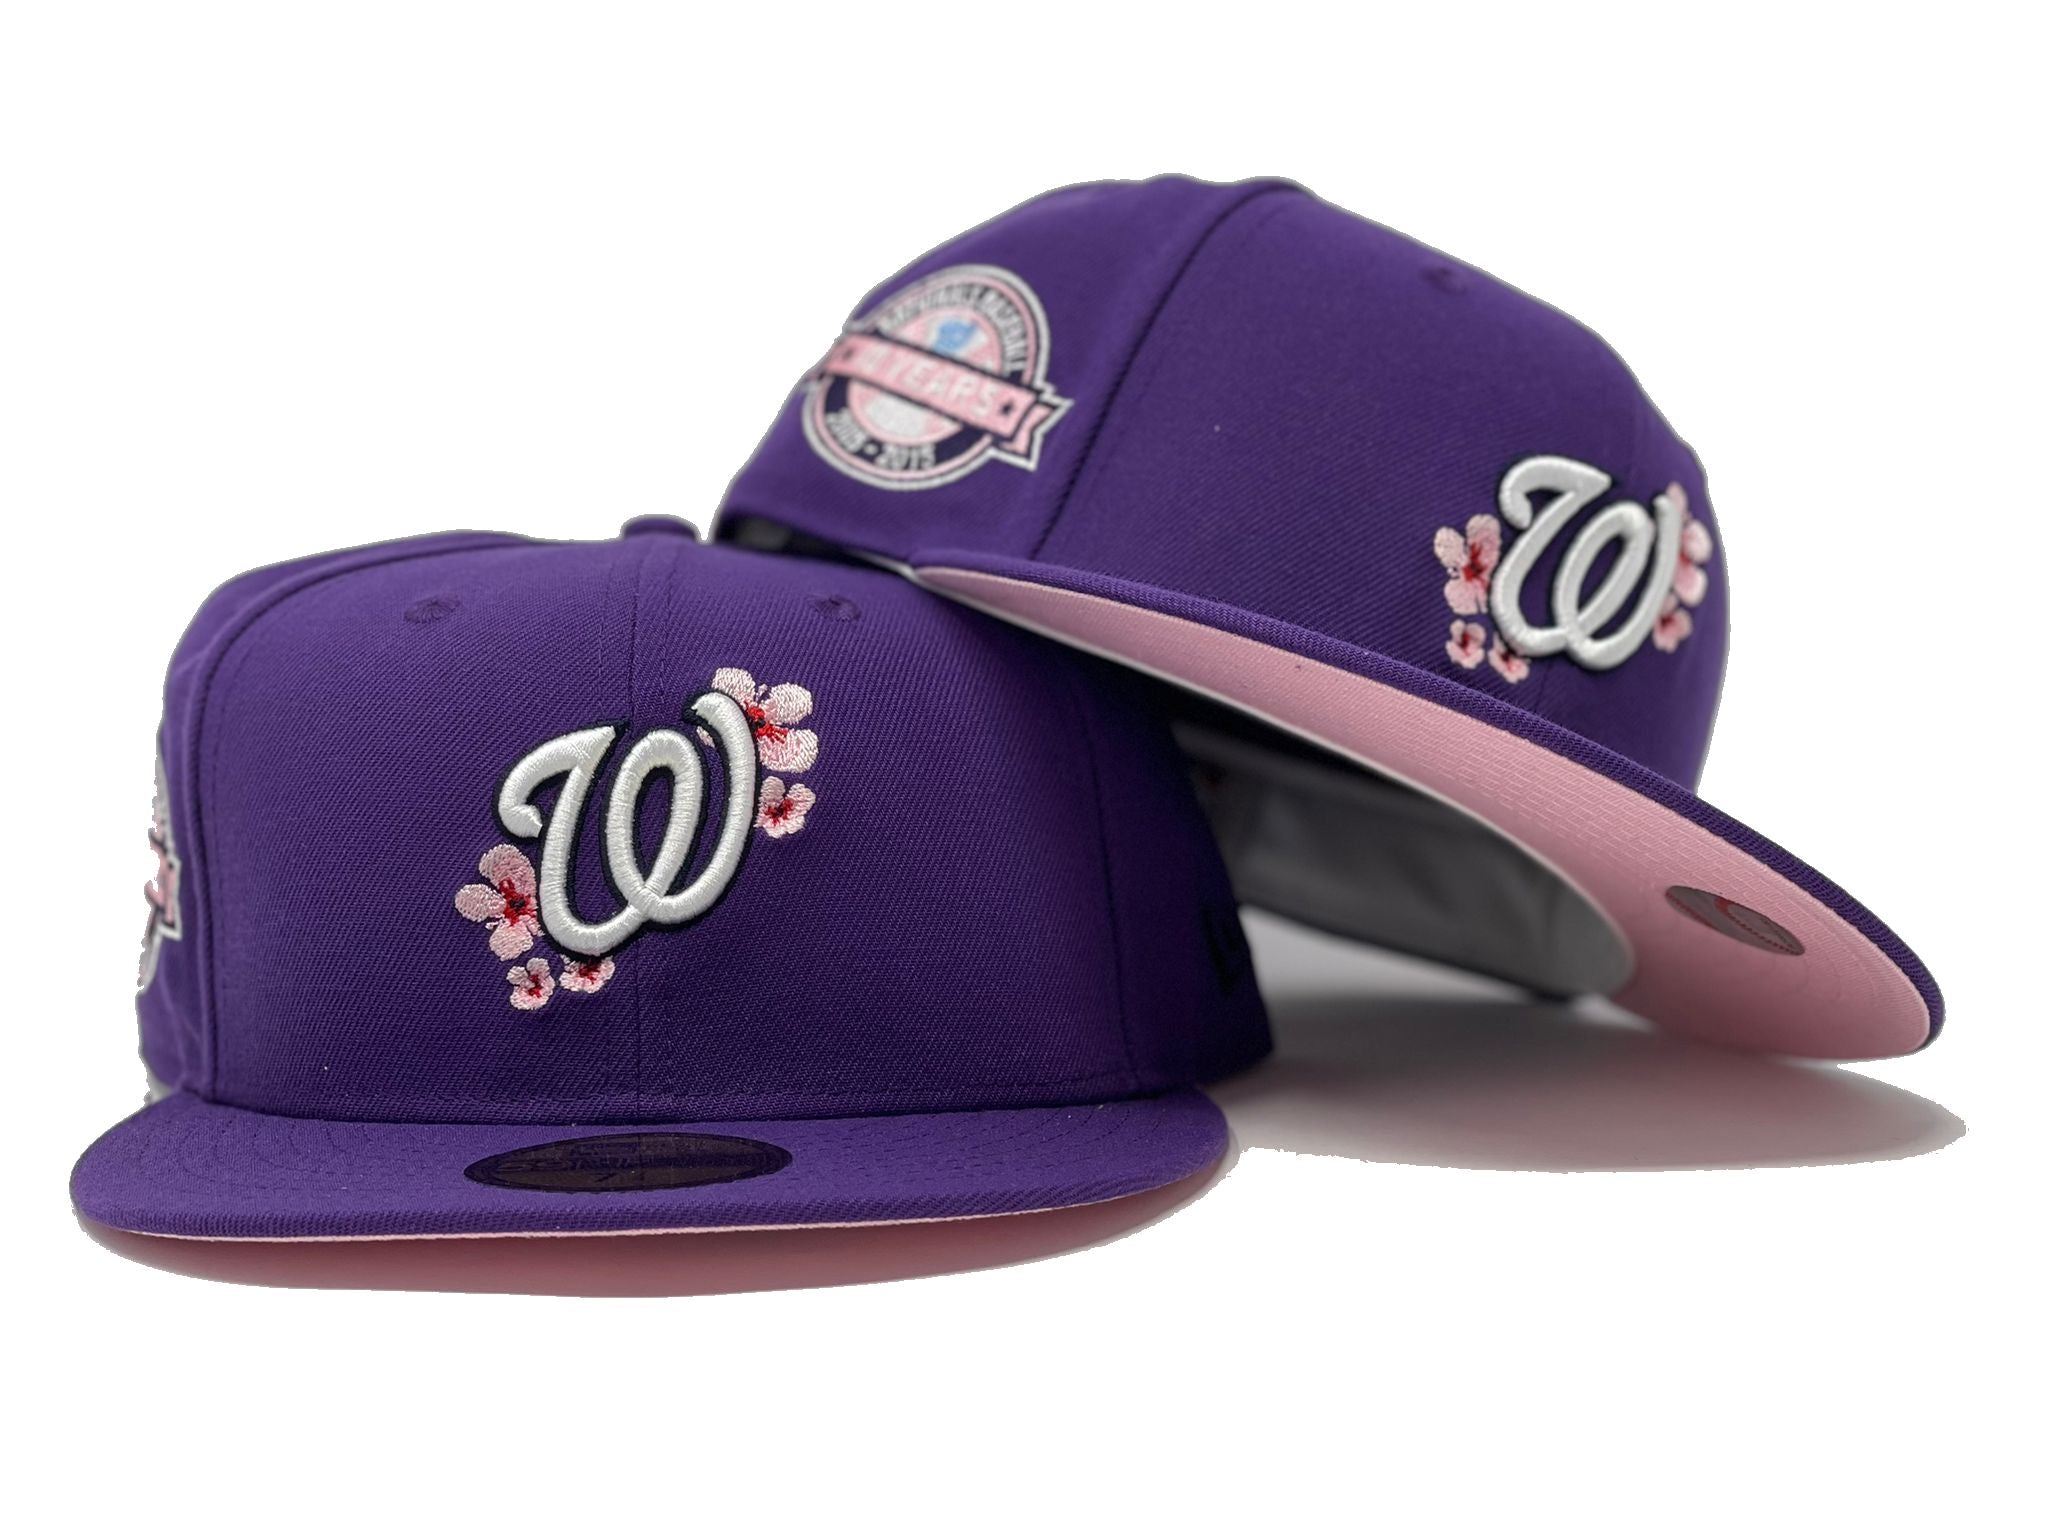 Men's Washington Nationals New Era Pink/Sky Blue 10th Anniversary  Undervisor 59FIFTY Fitted Hat